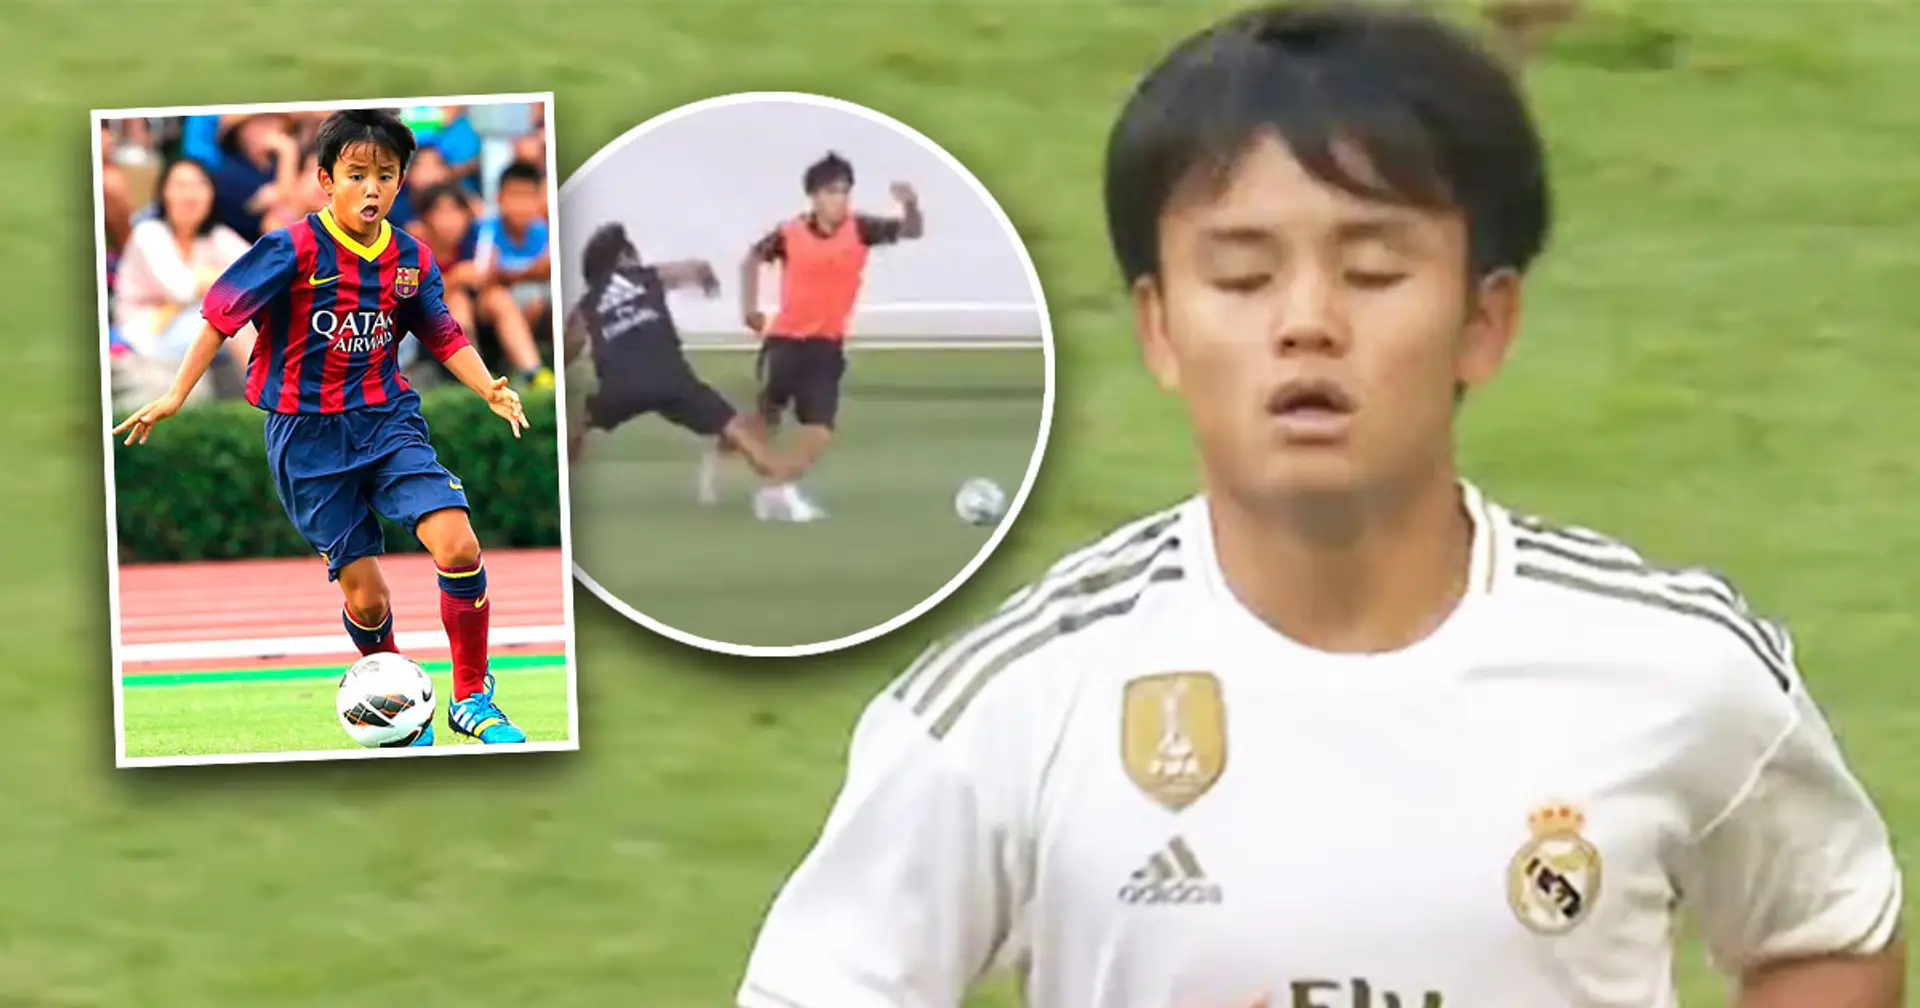 Where is Kubo, 'the new Messi' who left Barca for Real Madrid? Answered